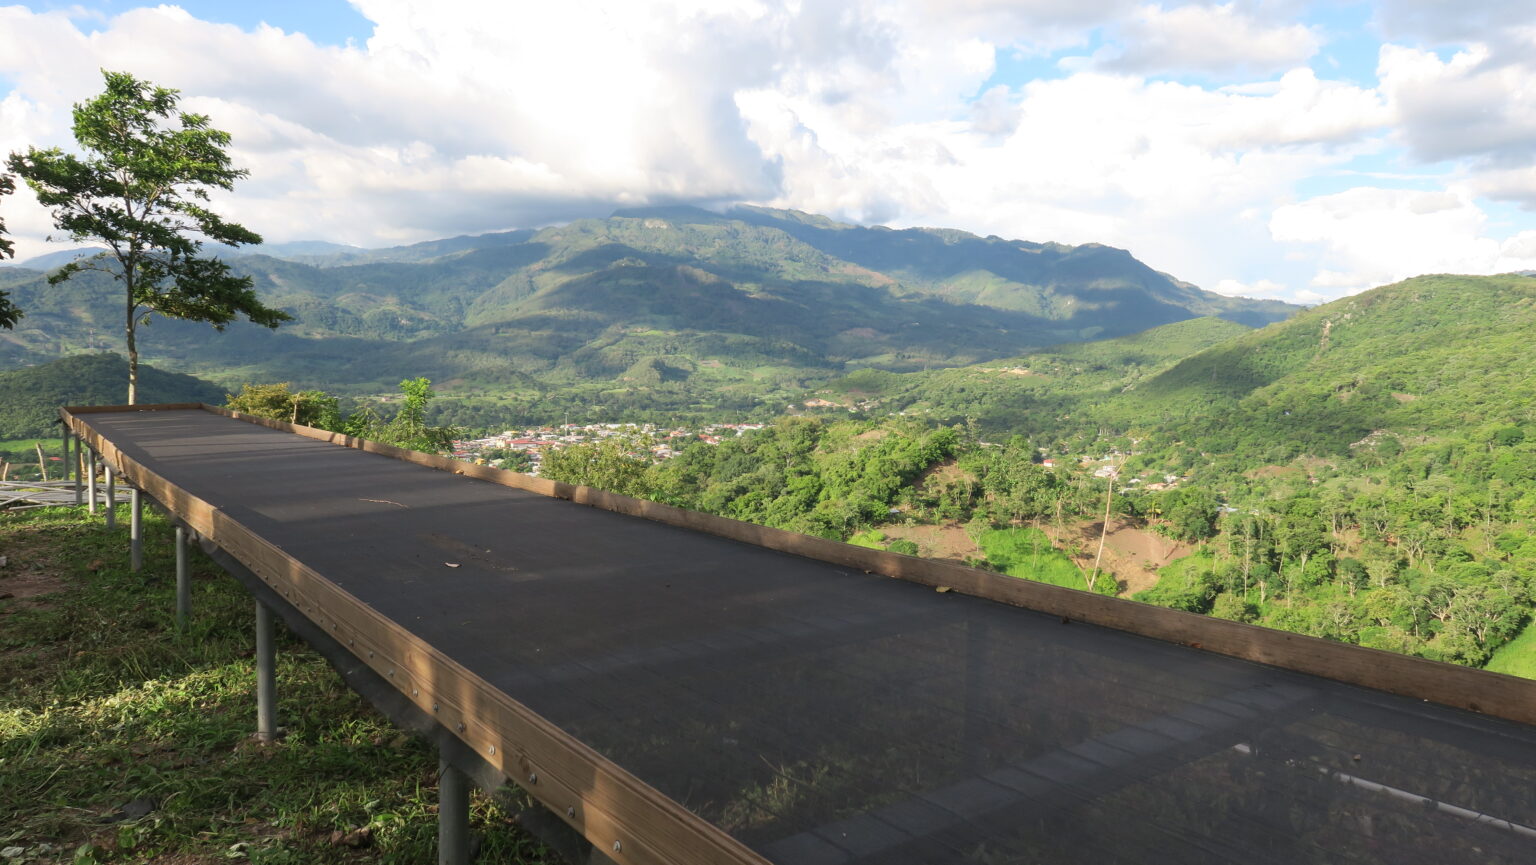 Scenic mountain view at Tio Juan in Honduras with natural process cherries drying under sun